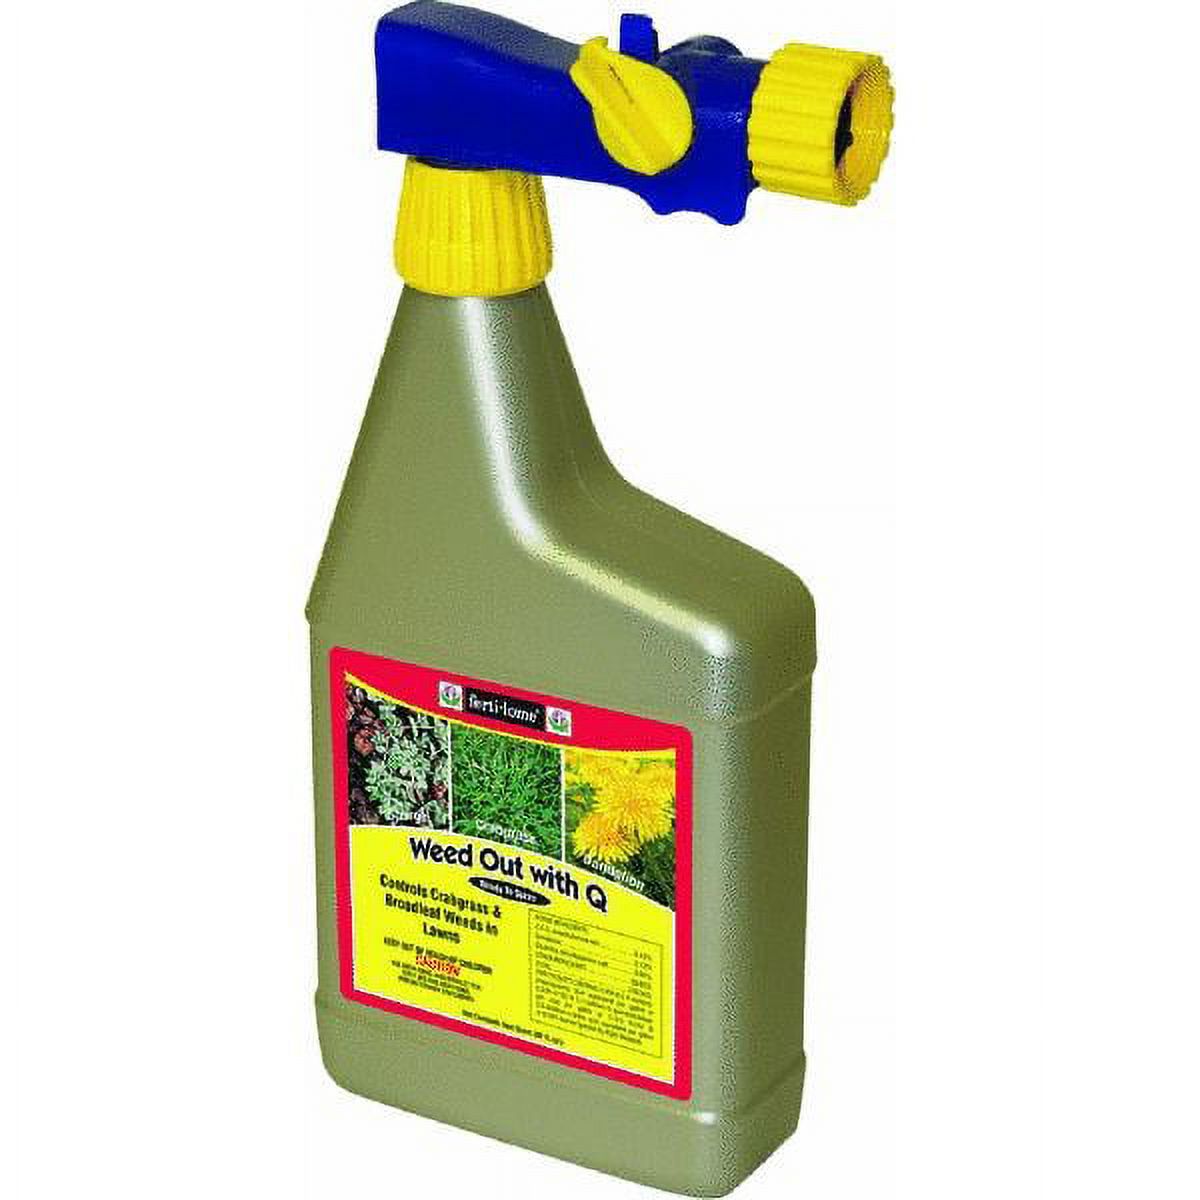 Fertilome Weed-Out with Crabgrass Killer RTS Weed and Crabgrass Killer RTU Liquid 32 oz - image 4 of 5